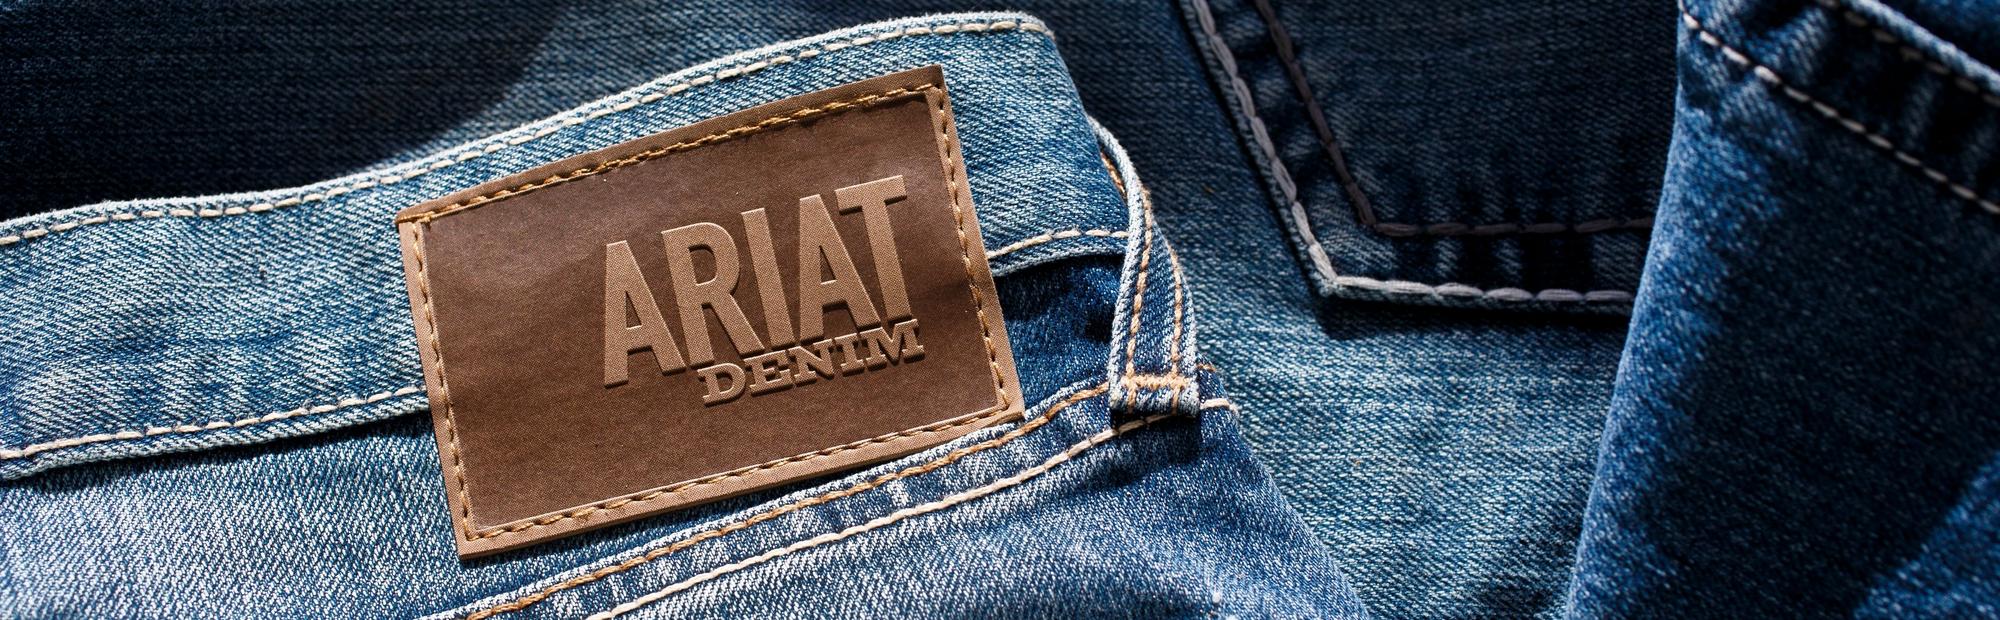 How to Sew Patches on Your Jeans